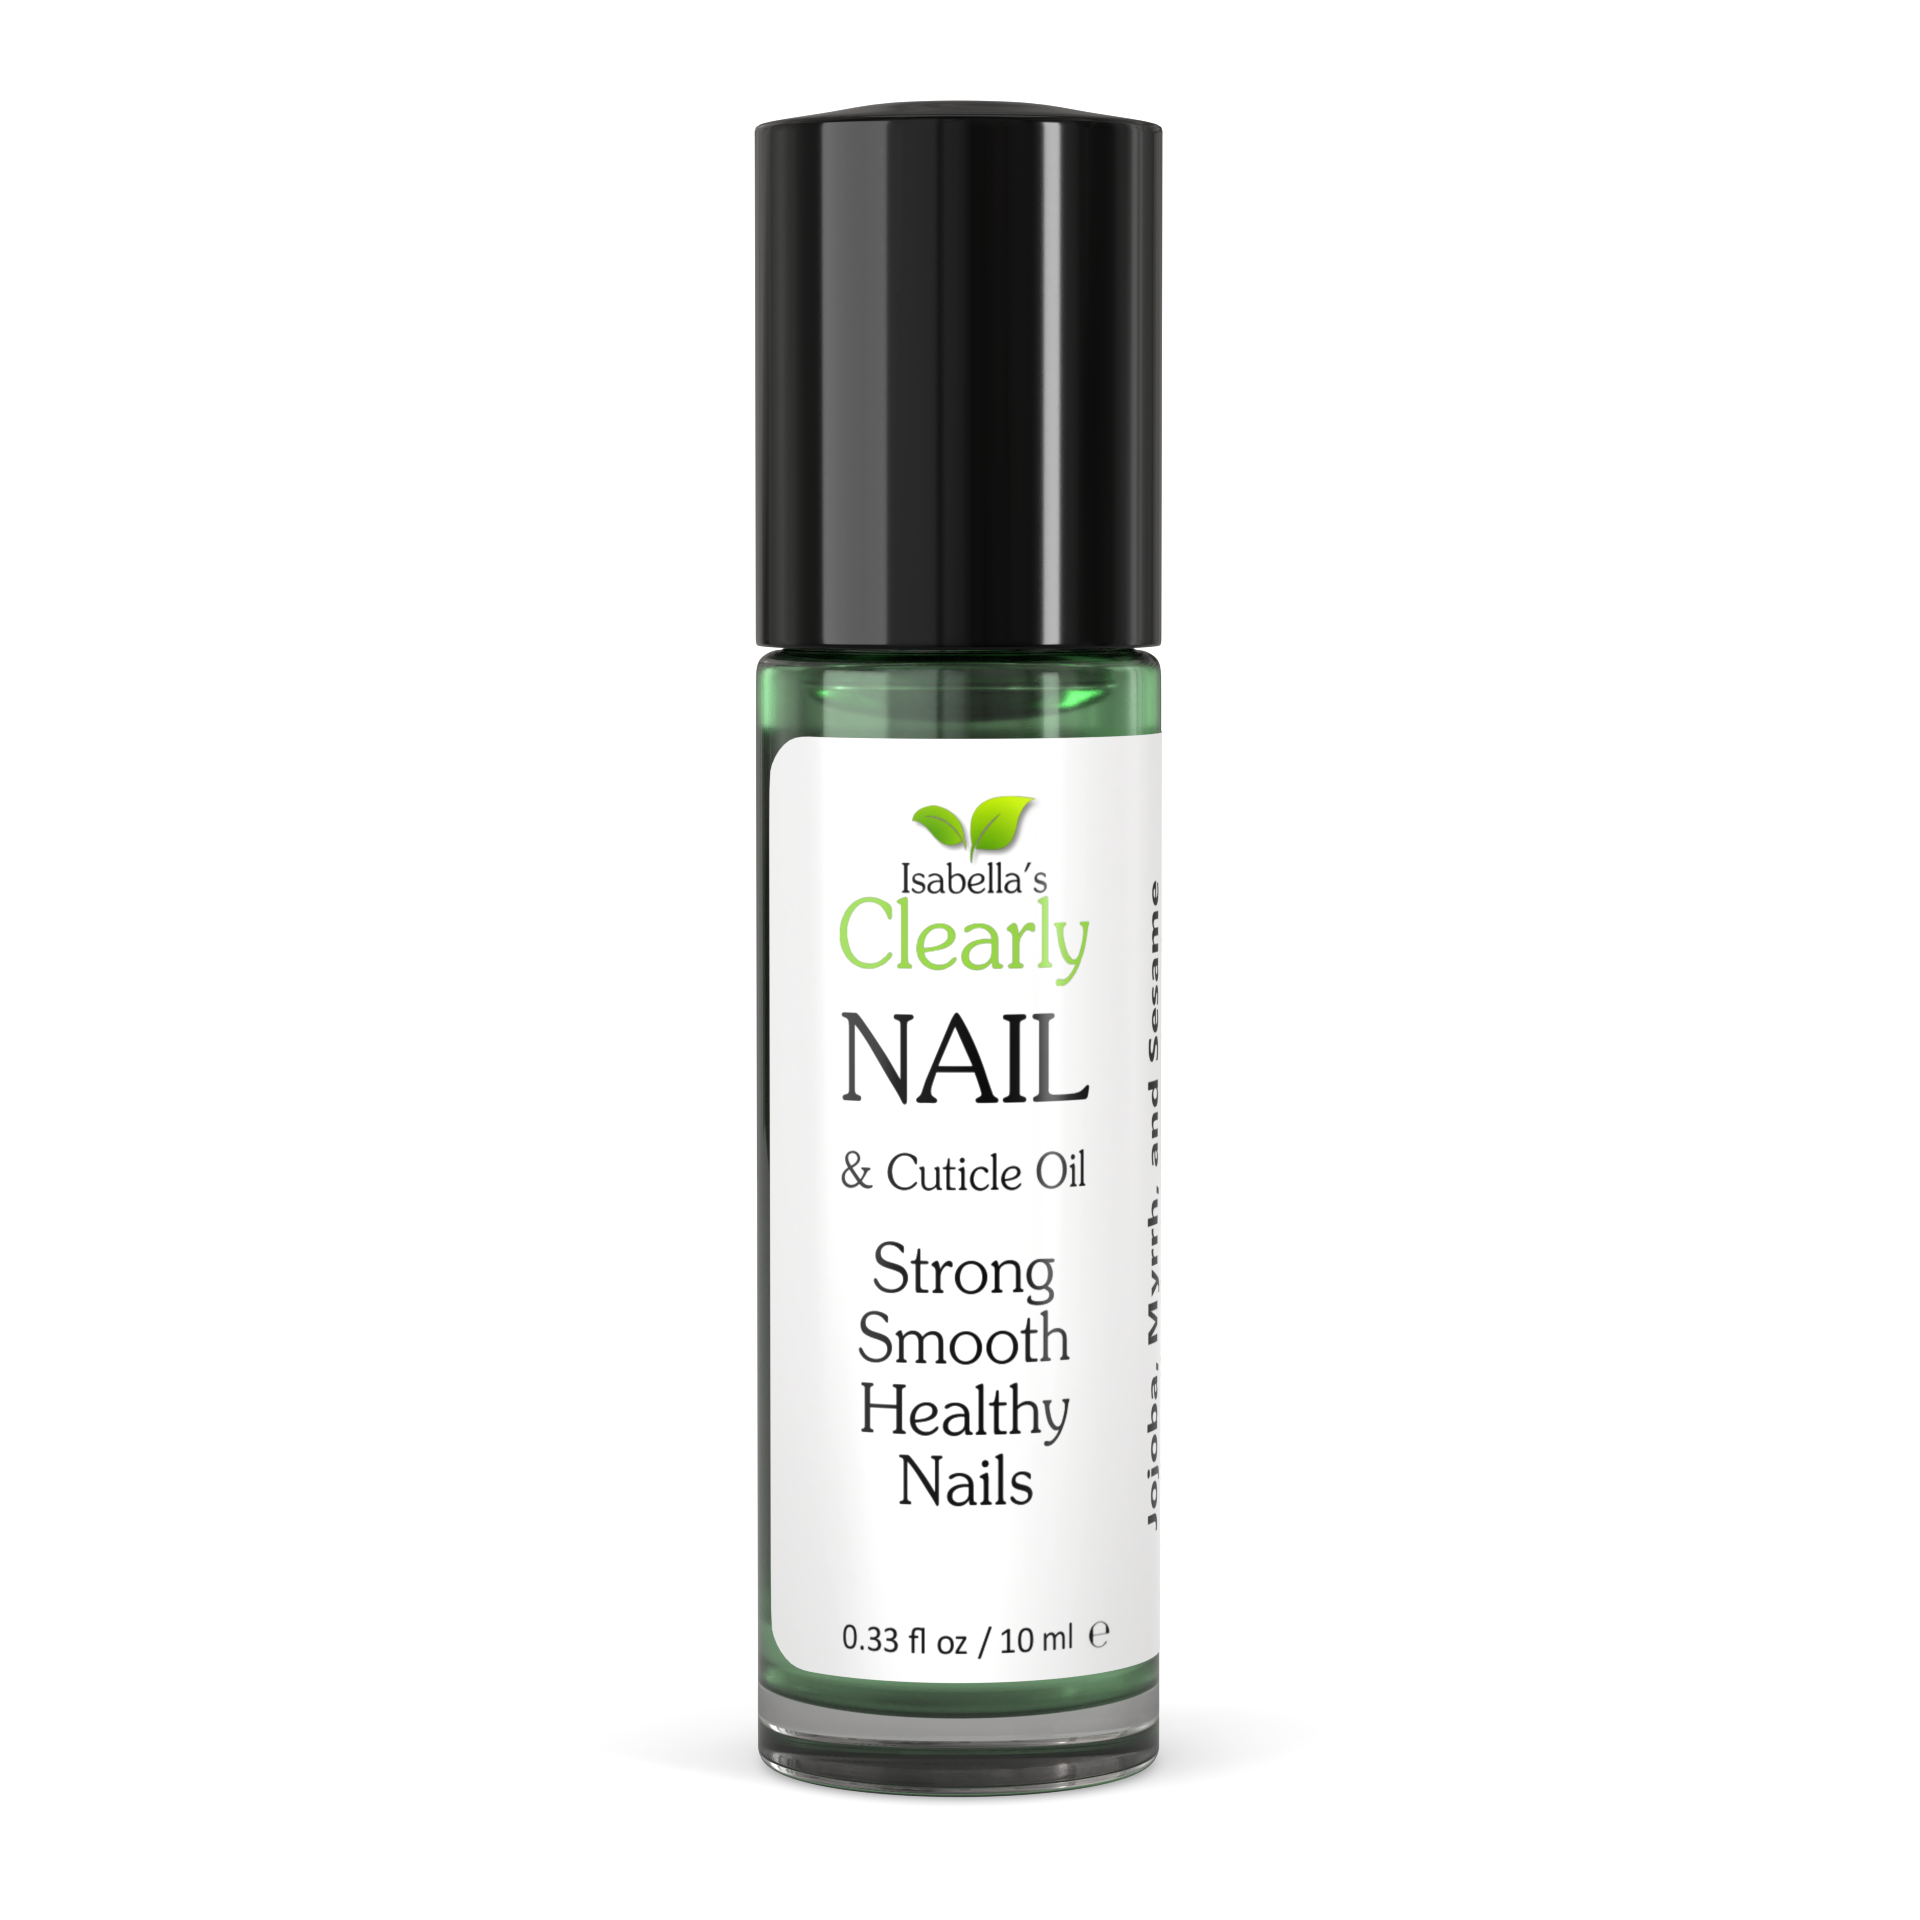 Amazon.com : Probelle Nail Hardener Formula 1 - Repair Damaged Nails, Extra  Strong Nail Growth Base Coat For Brittle Nails, Grows and Strengthens Soft,  Weak Nails, Aids Splitting, Breaking, Peeling Nails :